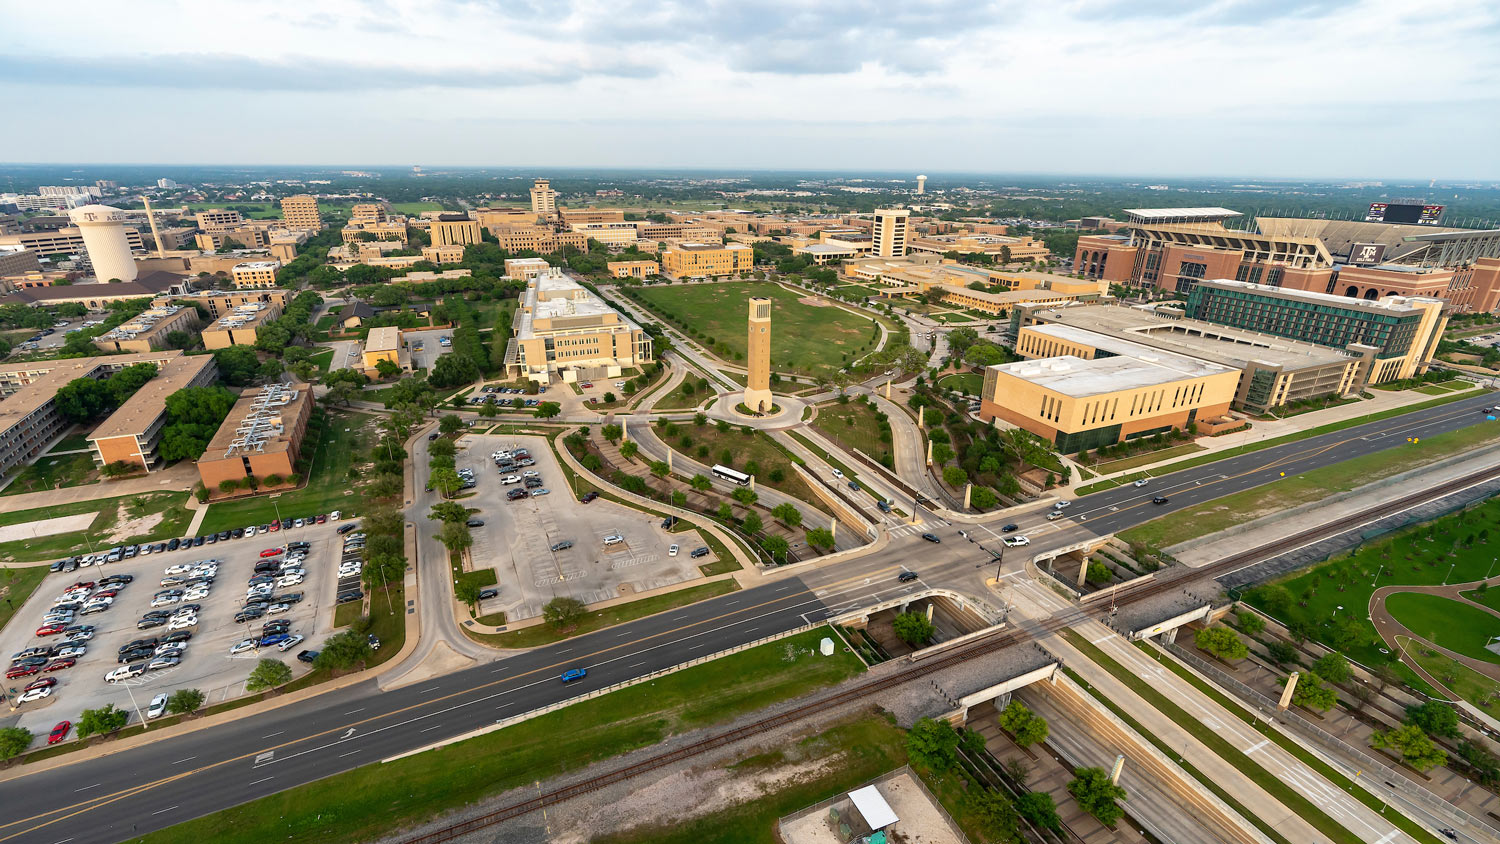 An aerial view of the Texas A&M University campus, focused on the clock tower